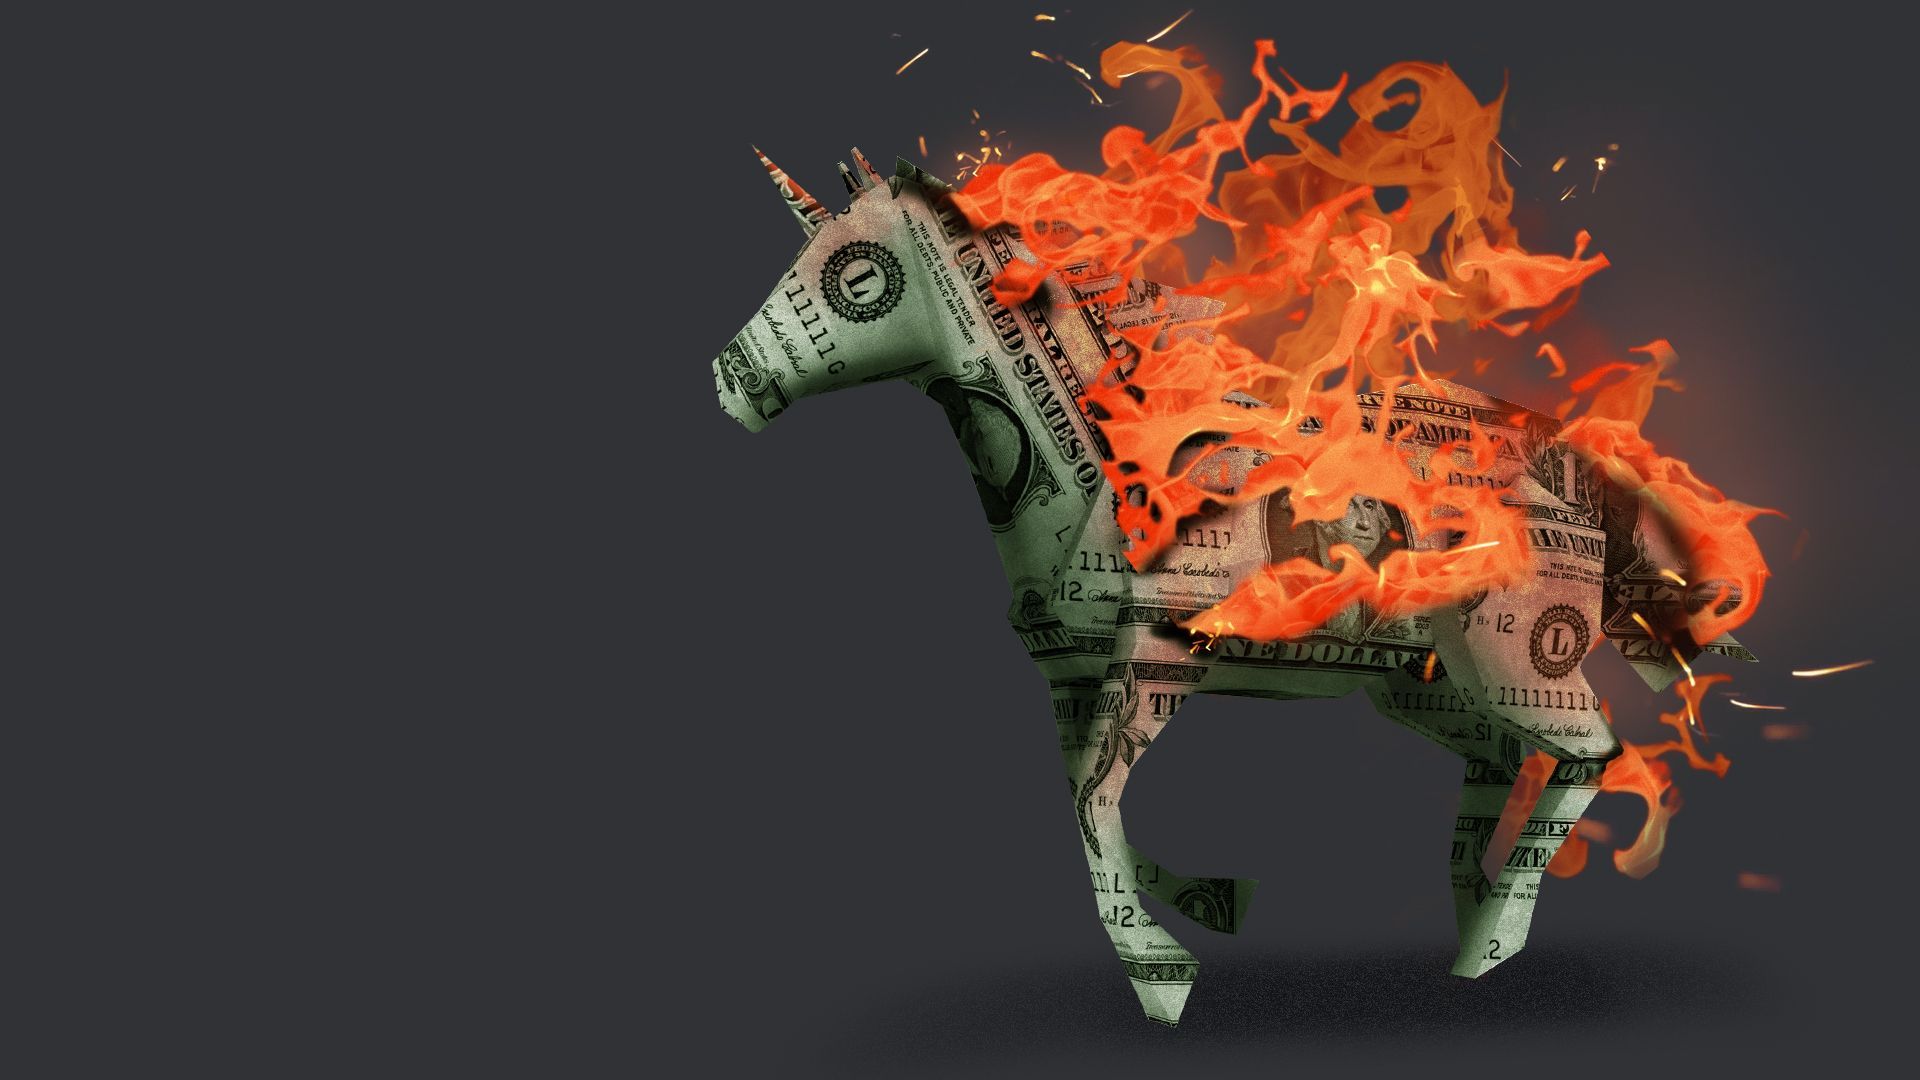 Illustration of an origami unicorn made of money on fire.